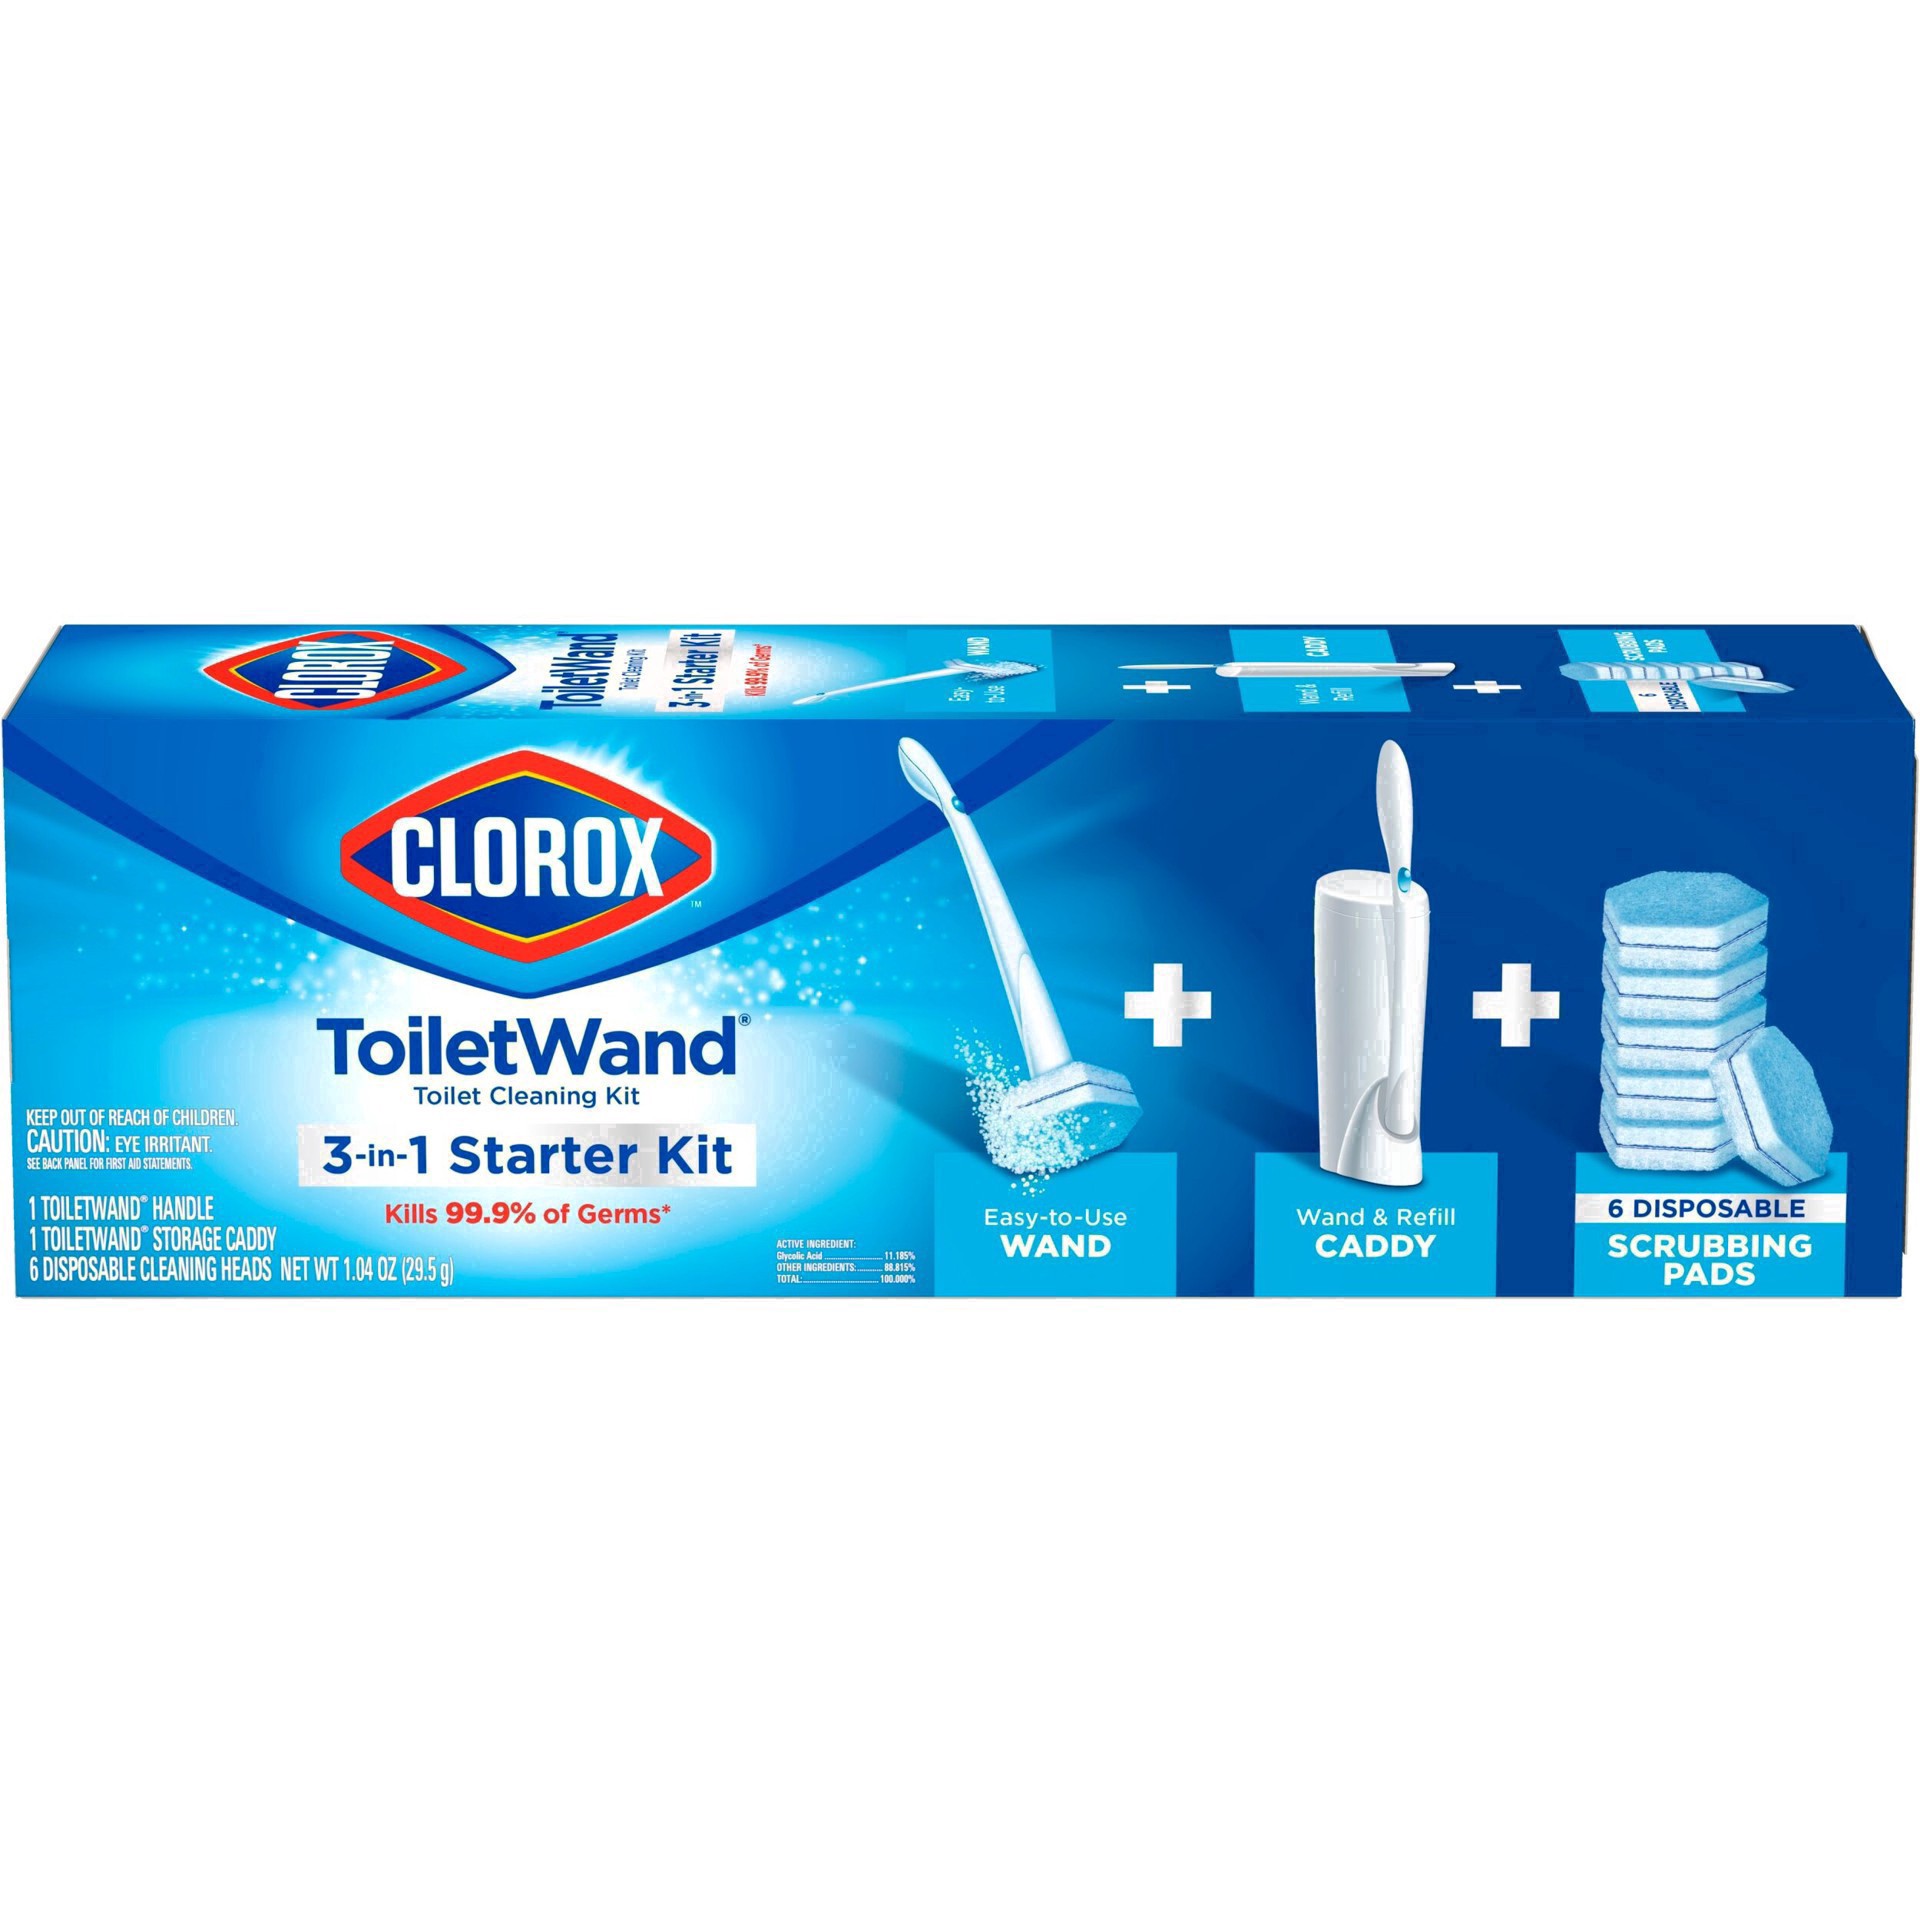 slide 56 of 176, Clorox Toilet Wand 3-in-1 Starter Toliet Cleaning Kit, 1 ct